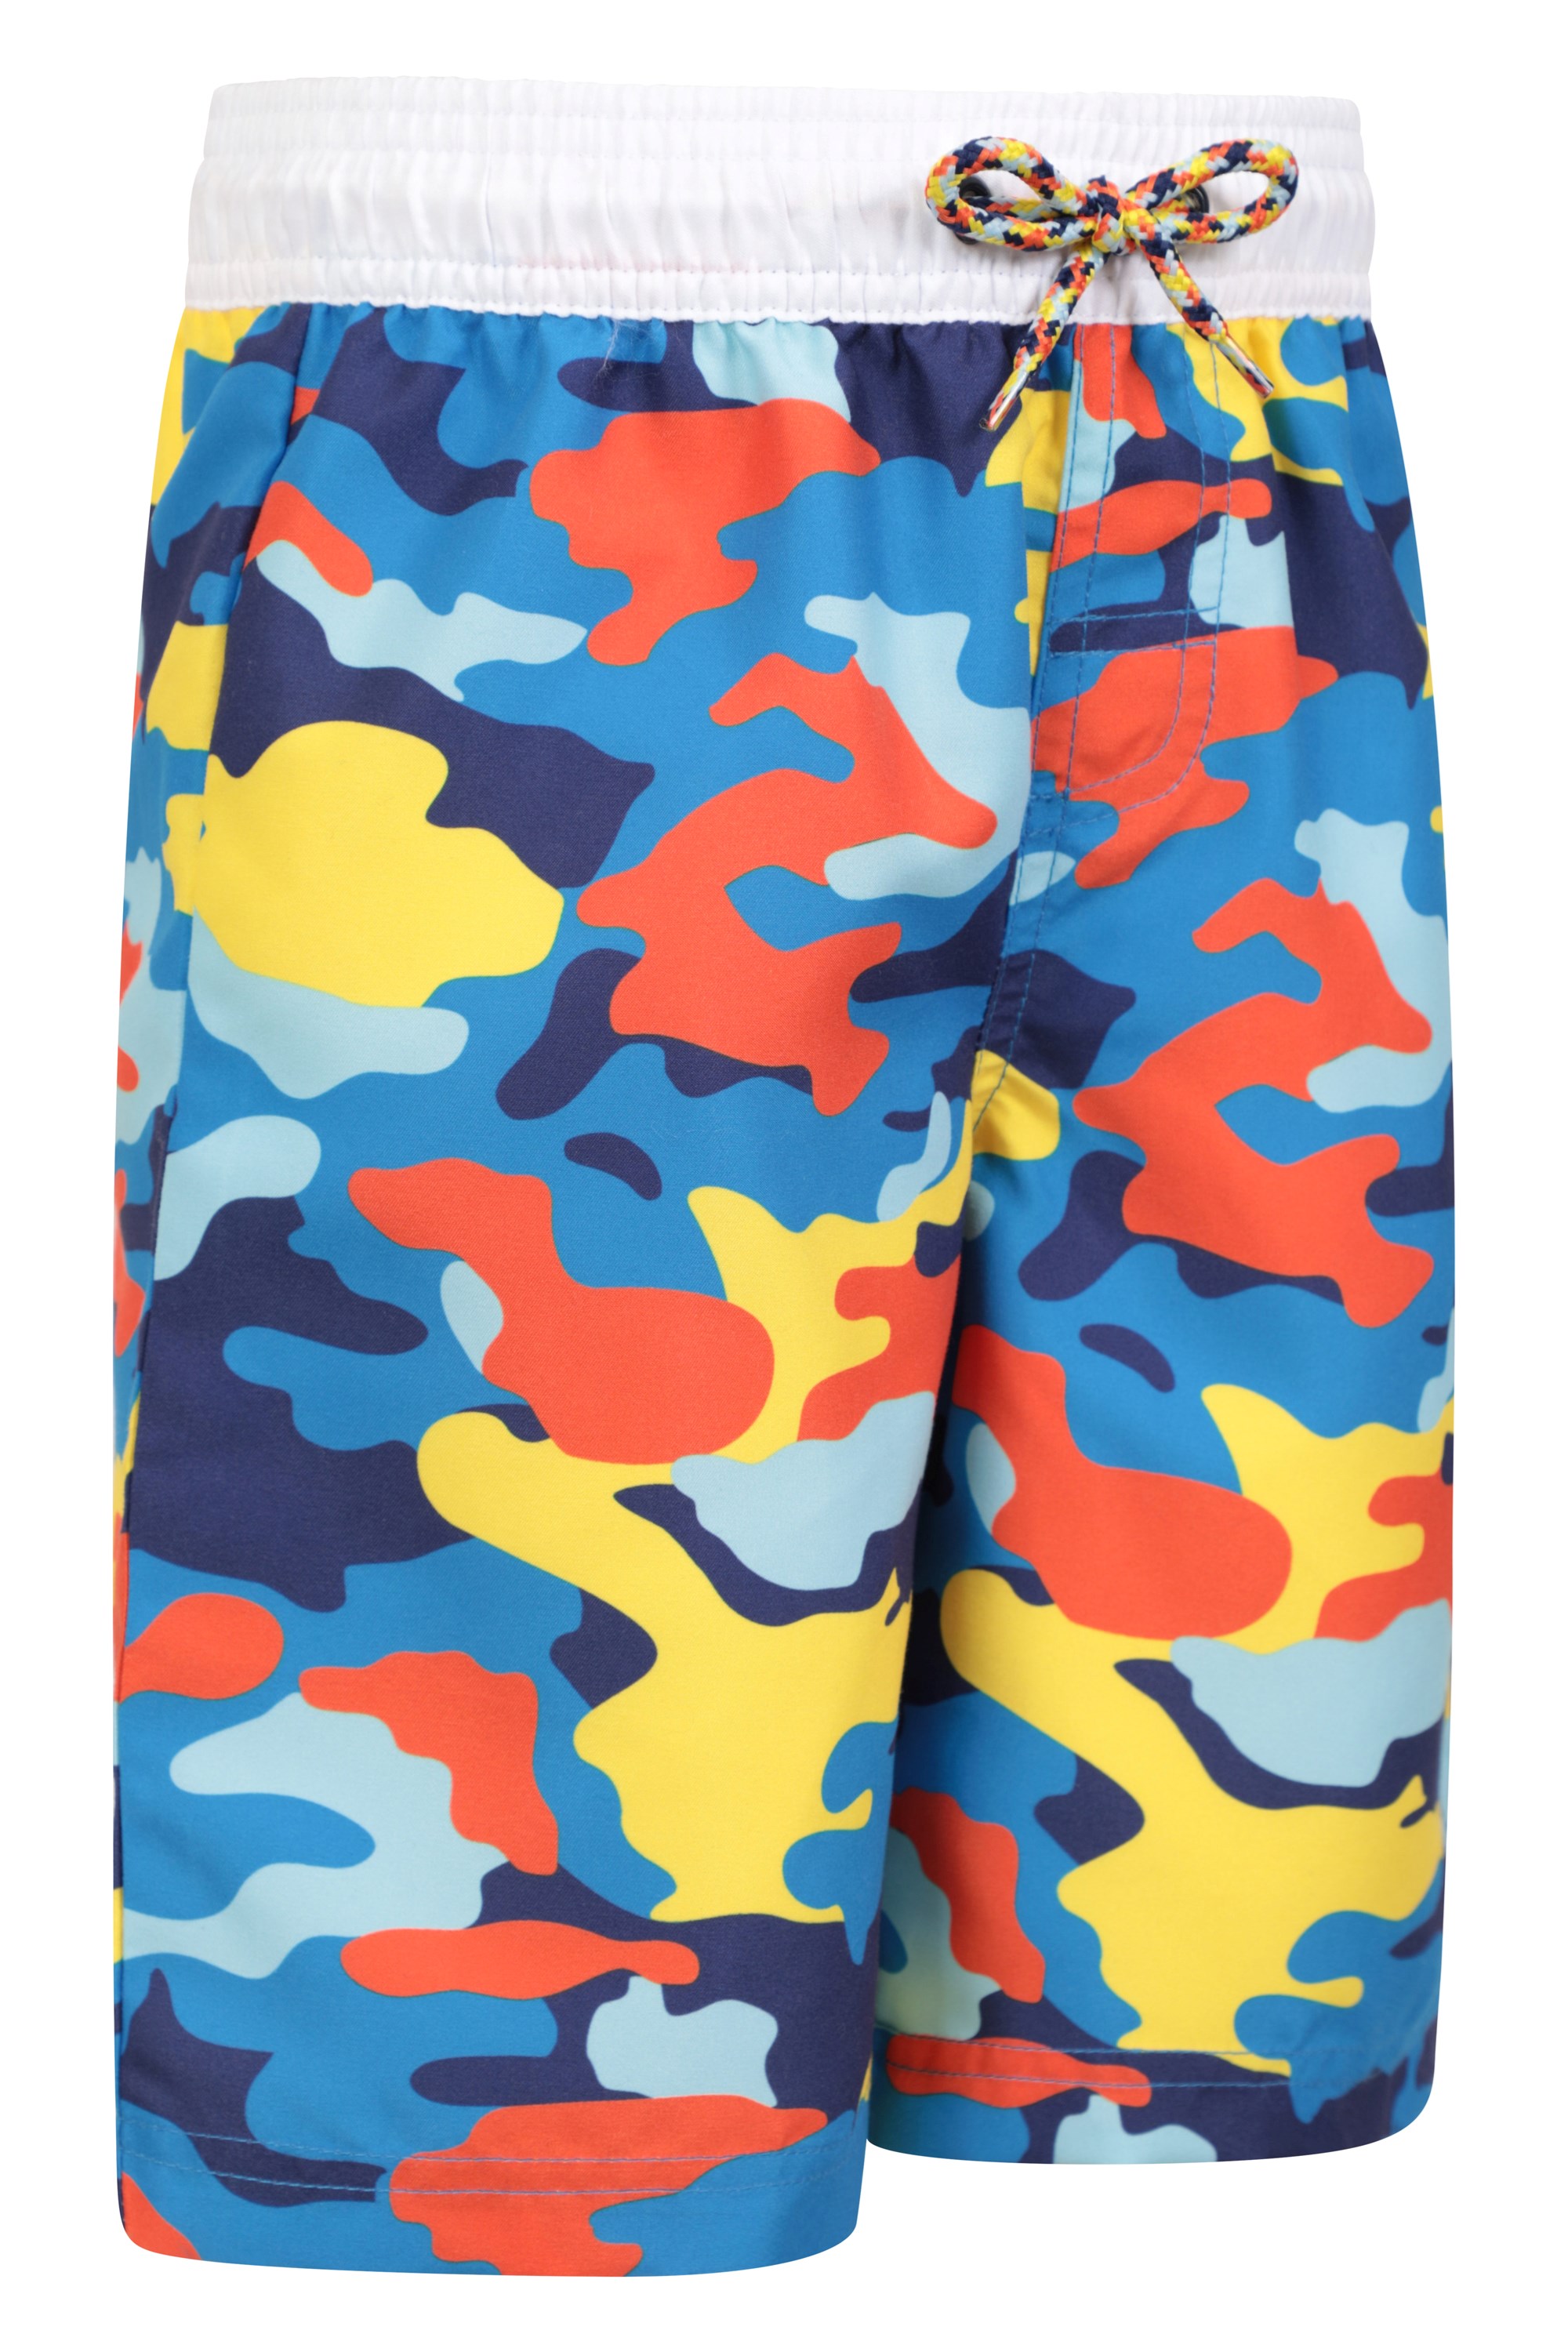 Quick Drying Girls Summer Beach Trouser Best for Poolside UV Protection Mountain Warehouse Kids Printed Swimming Shorts Lightweight Childrens Swim Pants Easy Care 